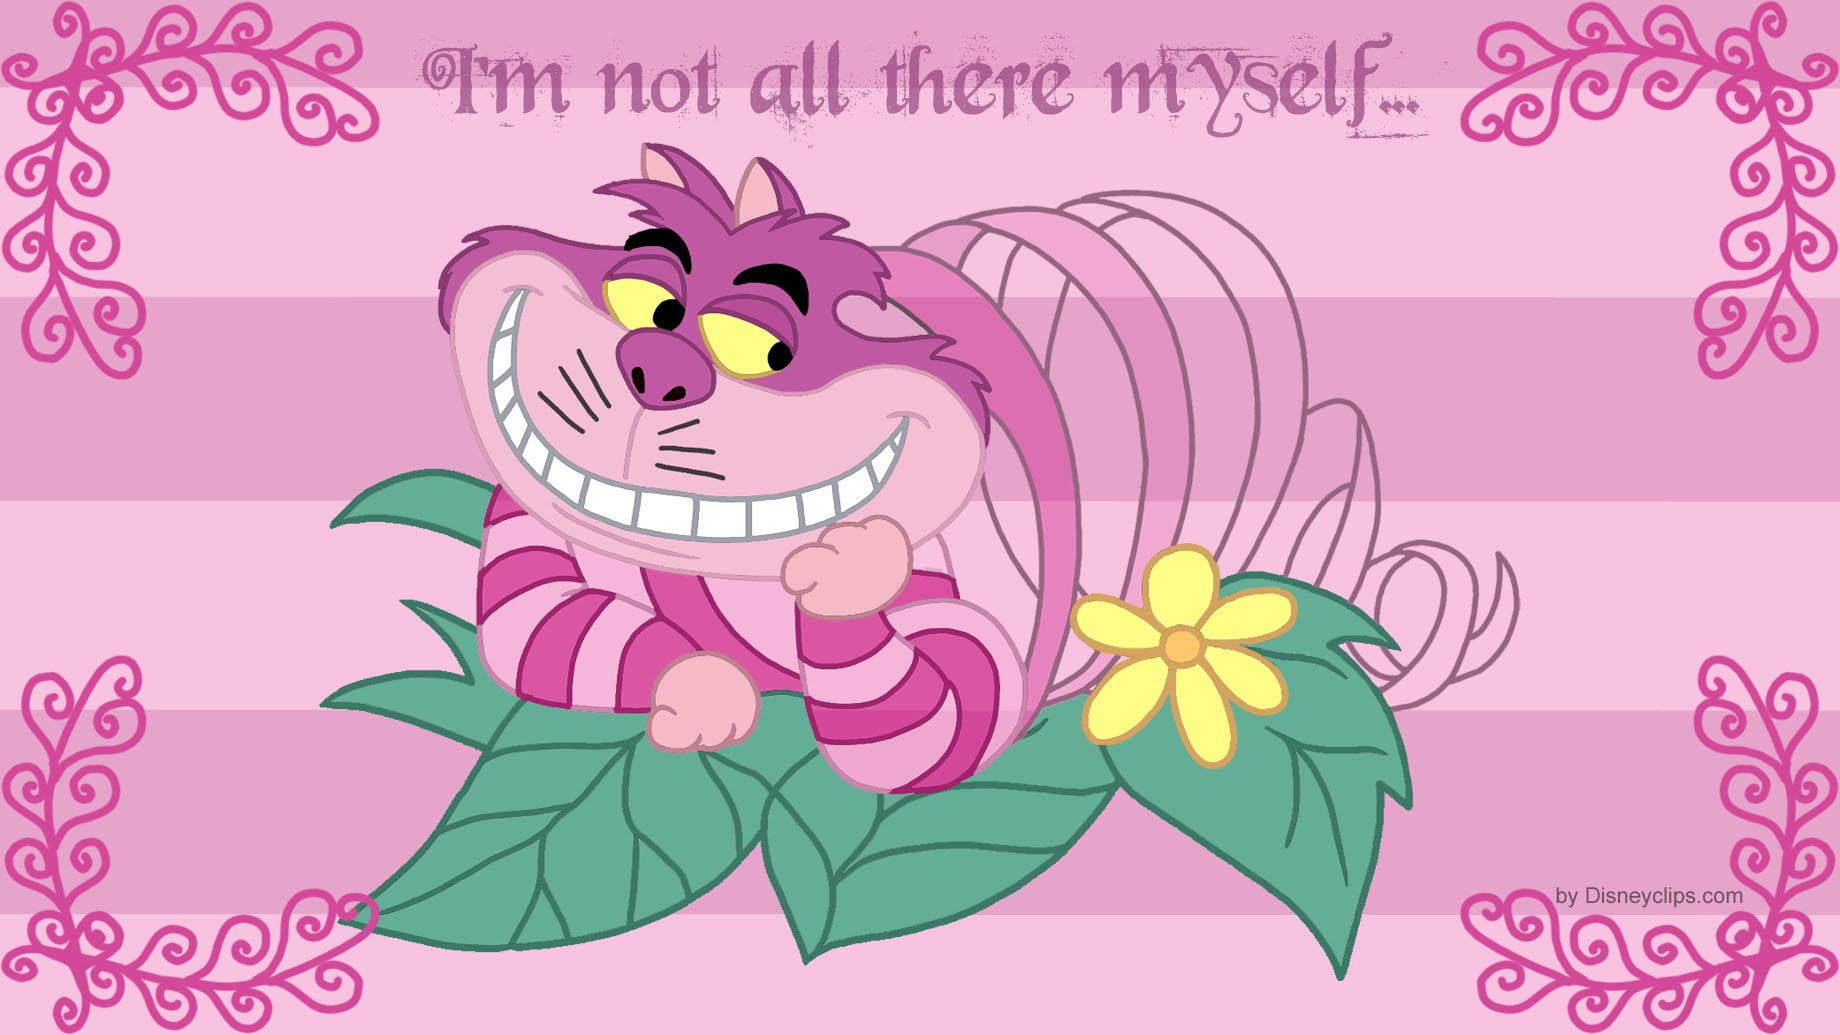 Cheshire Cat smiles mysteriously in the pink Wonderland Wallpaper